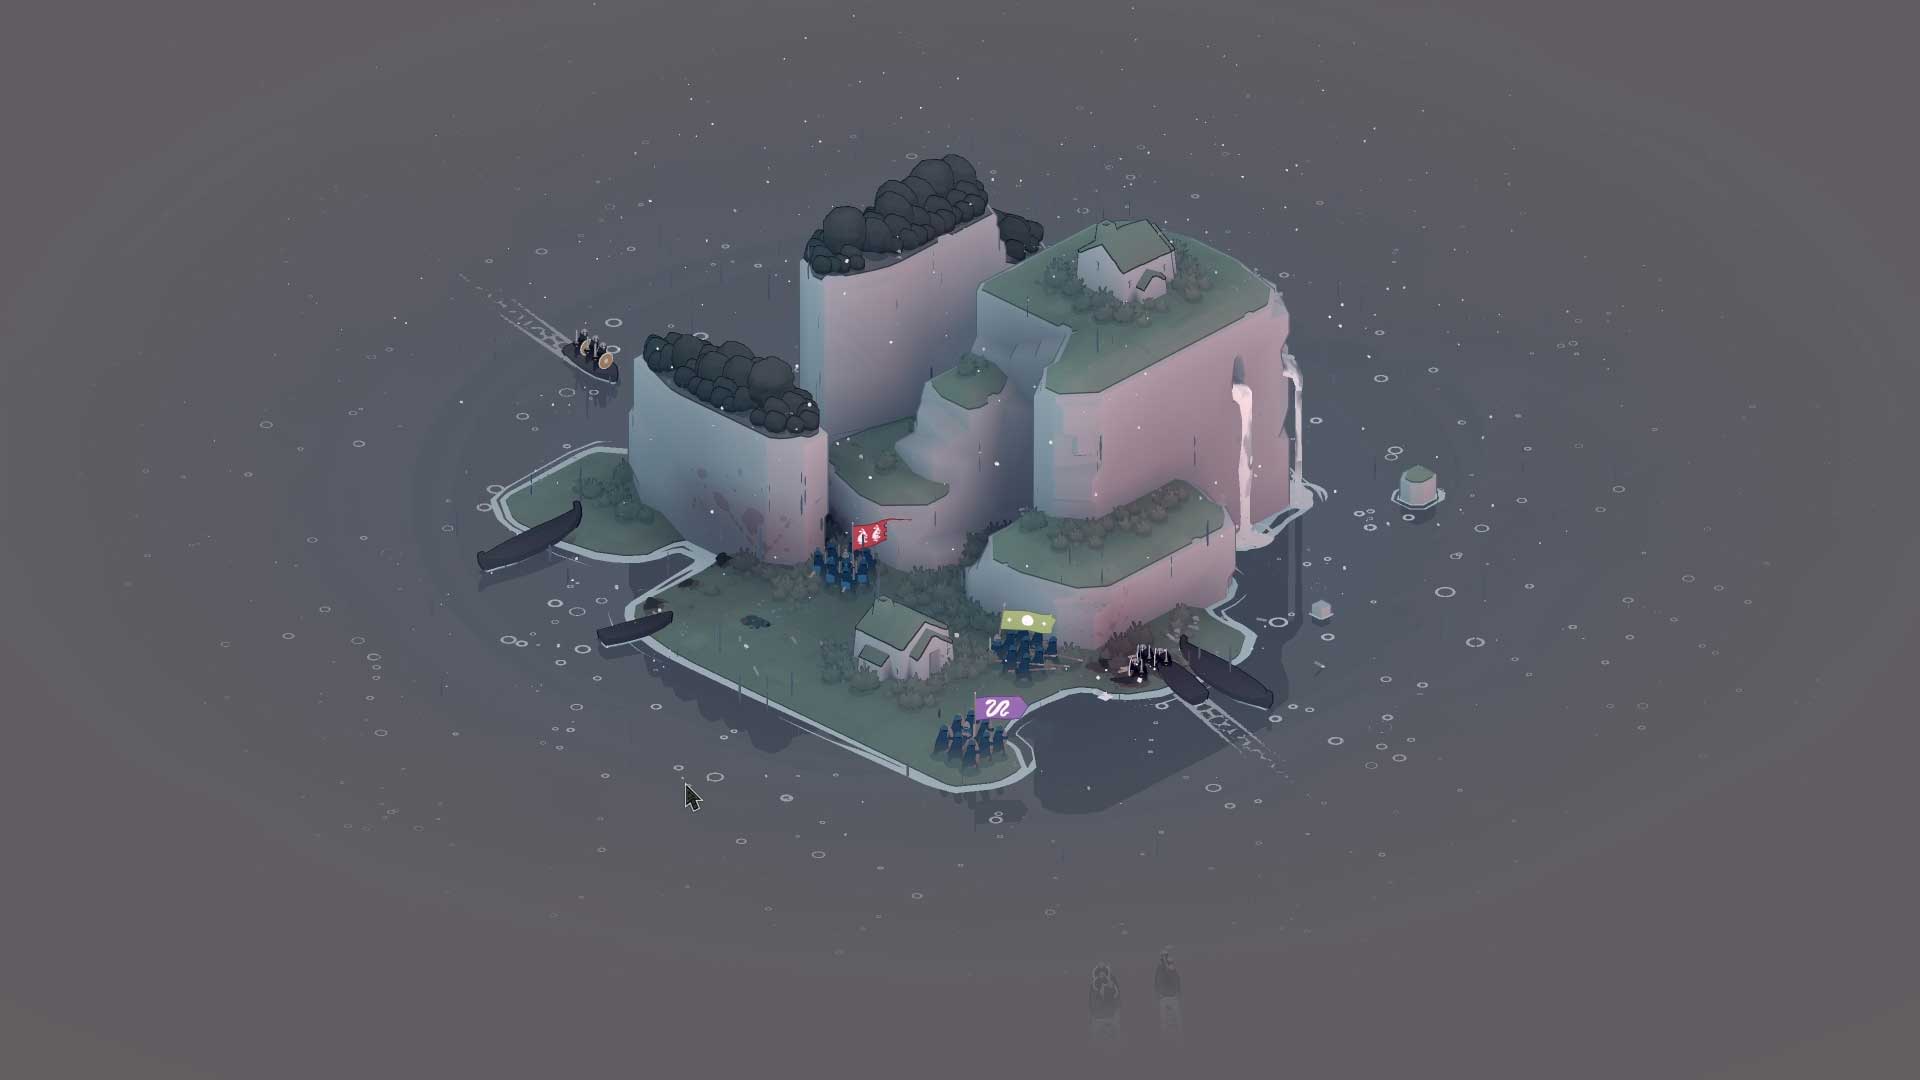 Bad North download the new